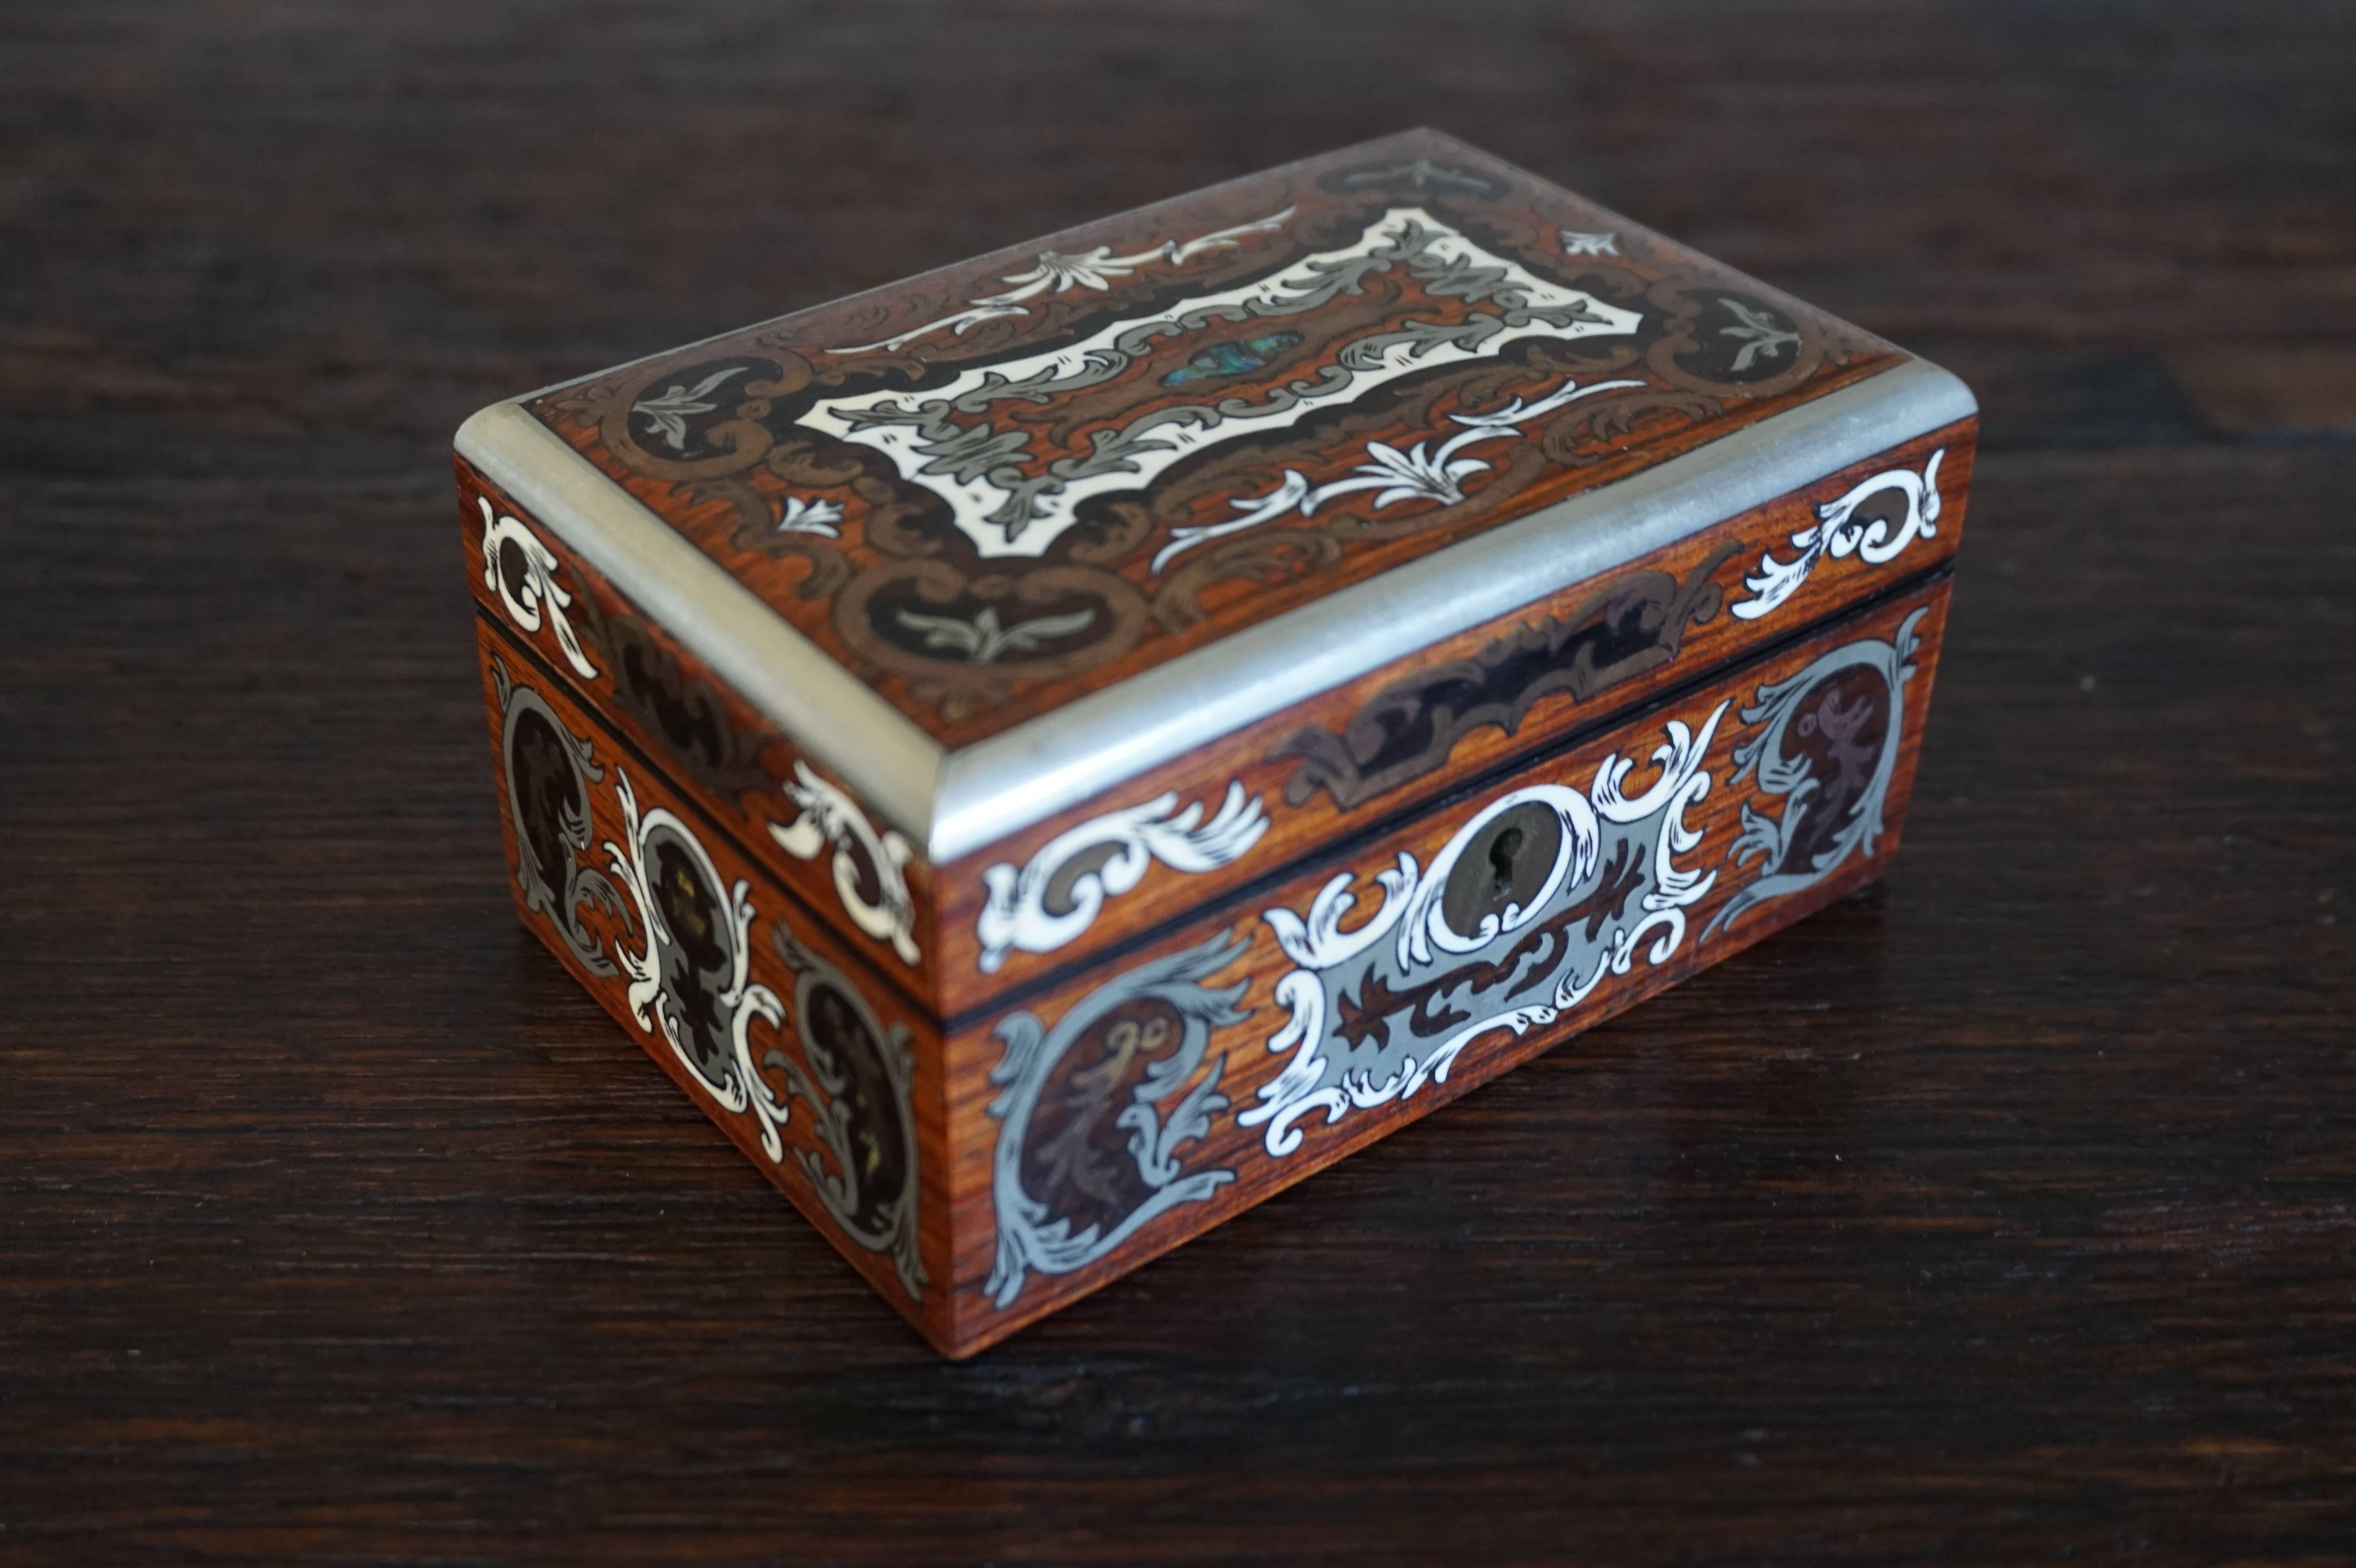 Stunning Antique Box Inlaid with Amazing Motifs in Silver, Bone, Mother-of-Pearl 1